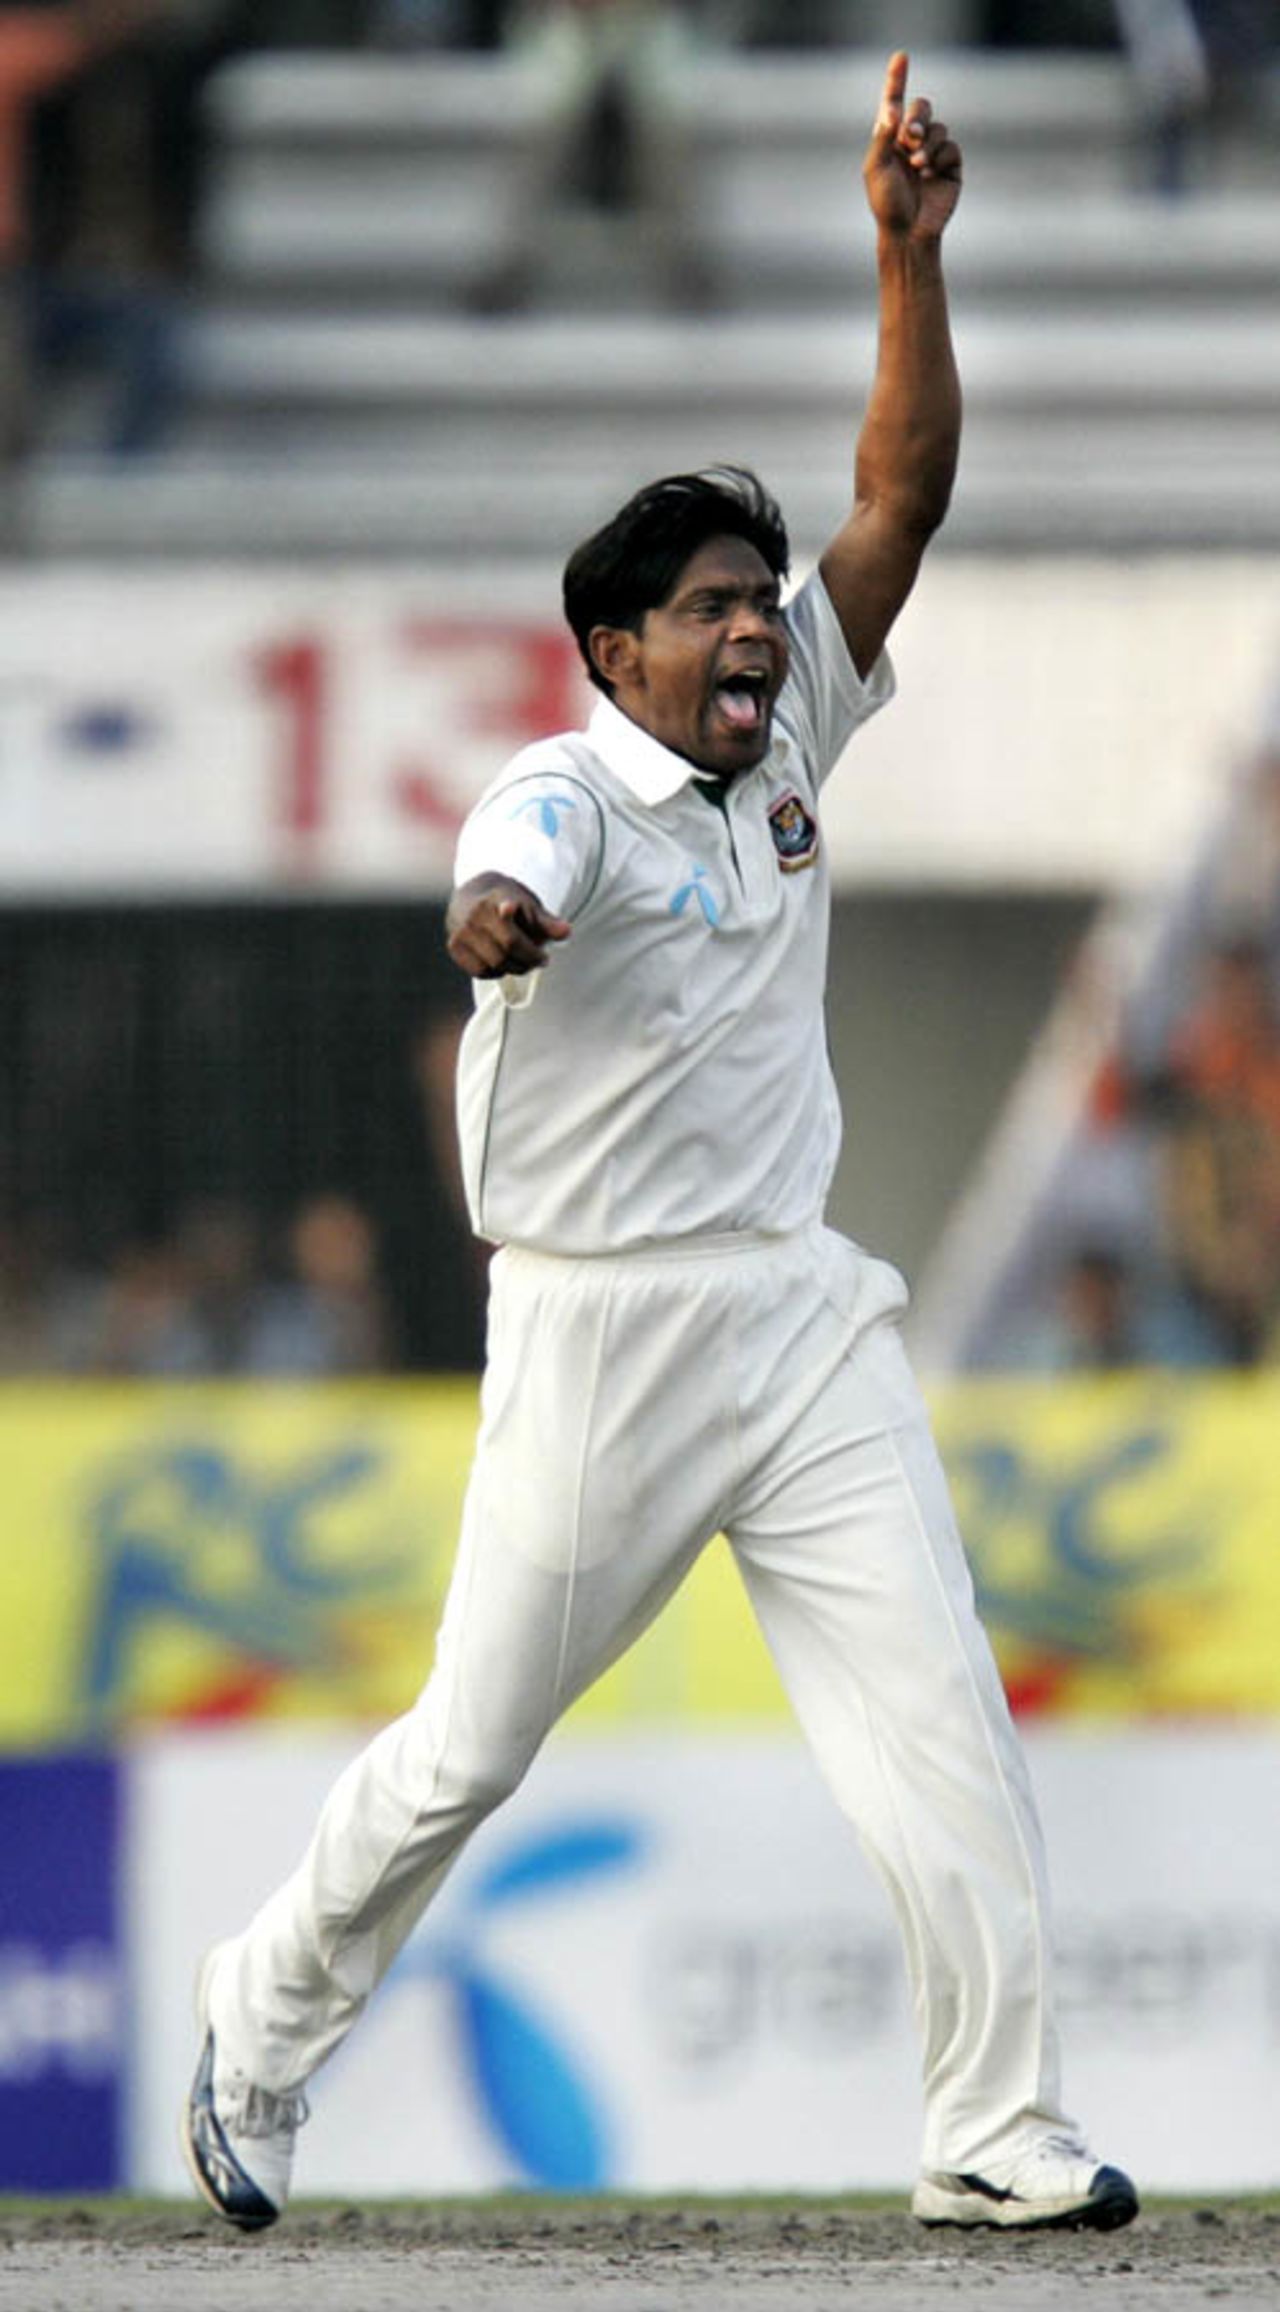 Mohammad Rafique is delighted after dismissing Hashim Amla, Bangladesh v South Africa, 1st Test, Mirpur, 1st day, February 22, 2008